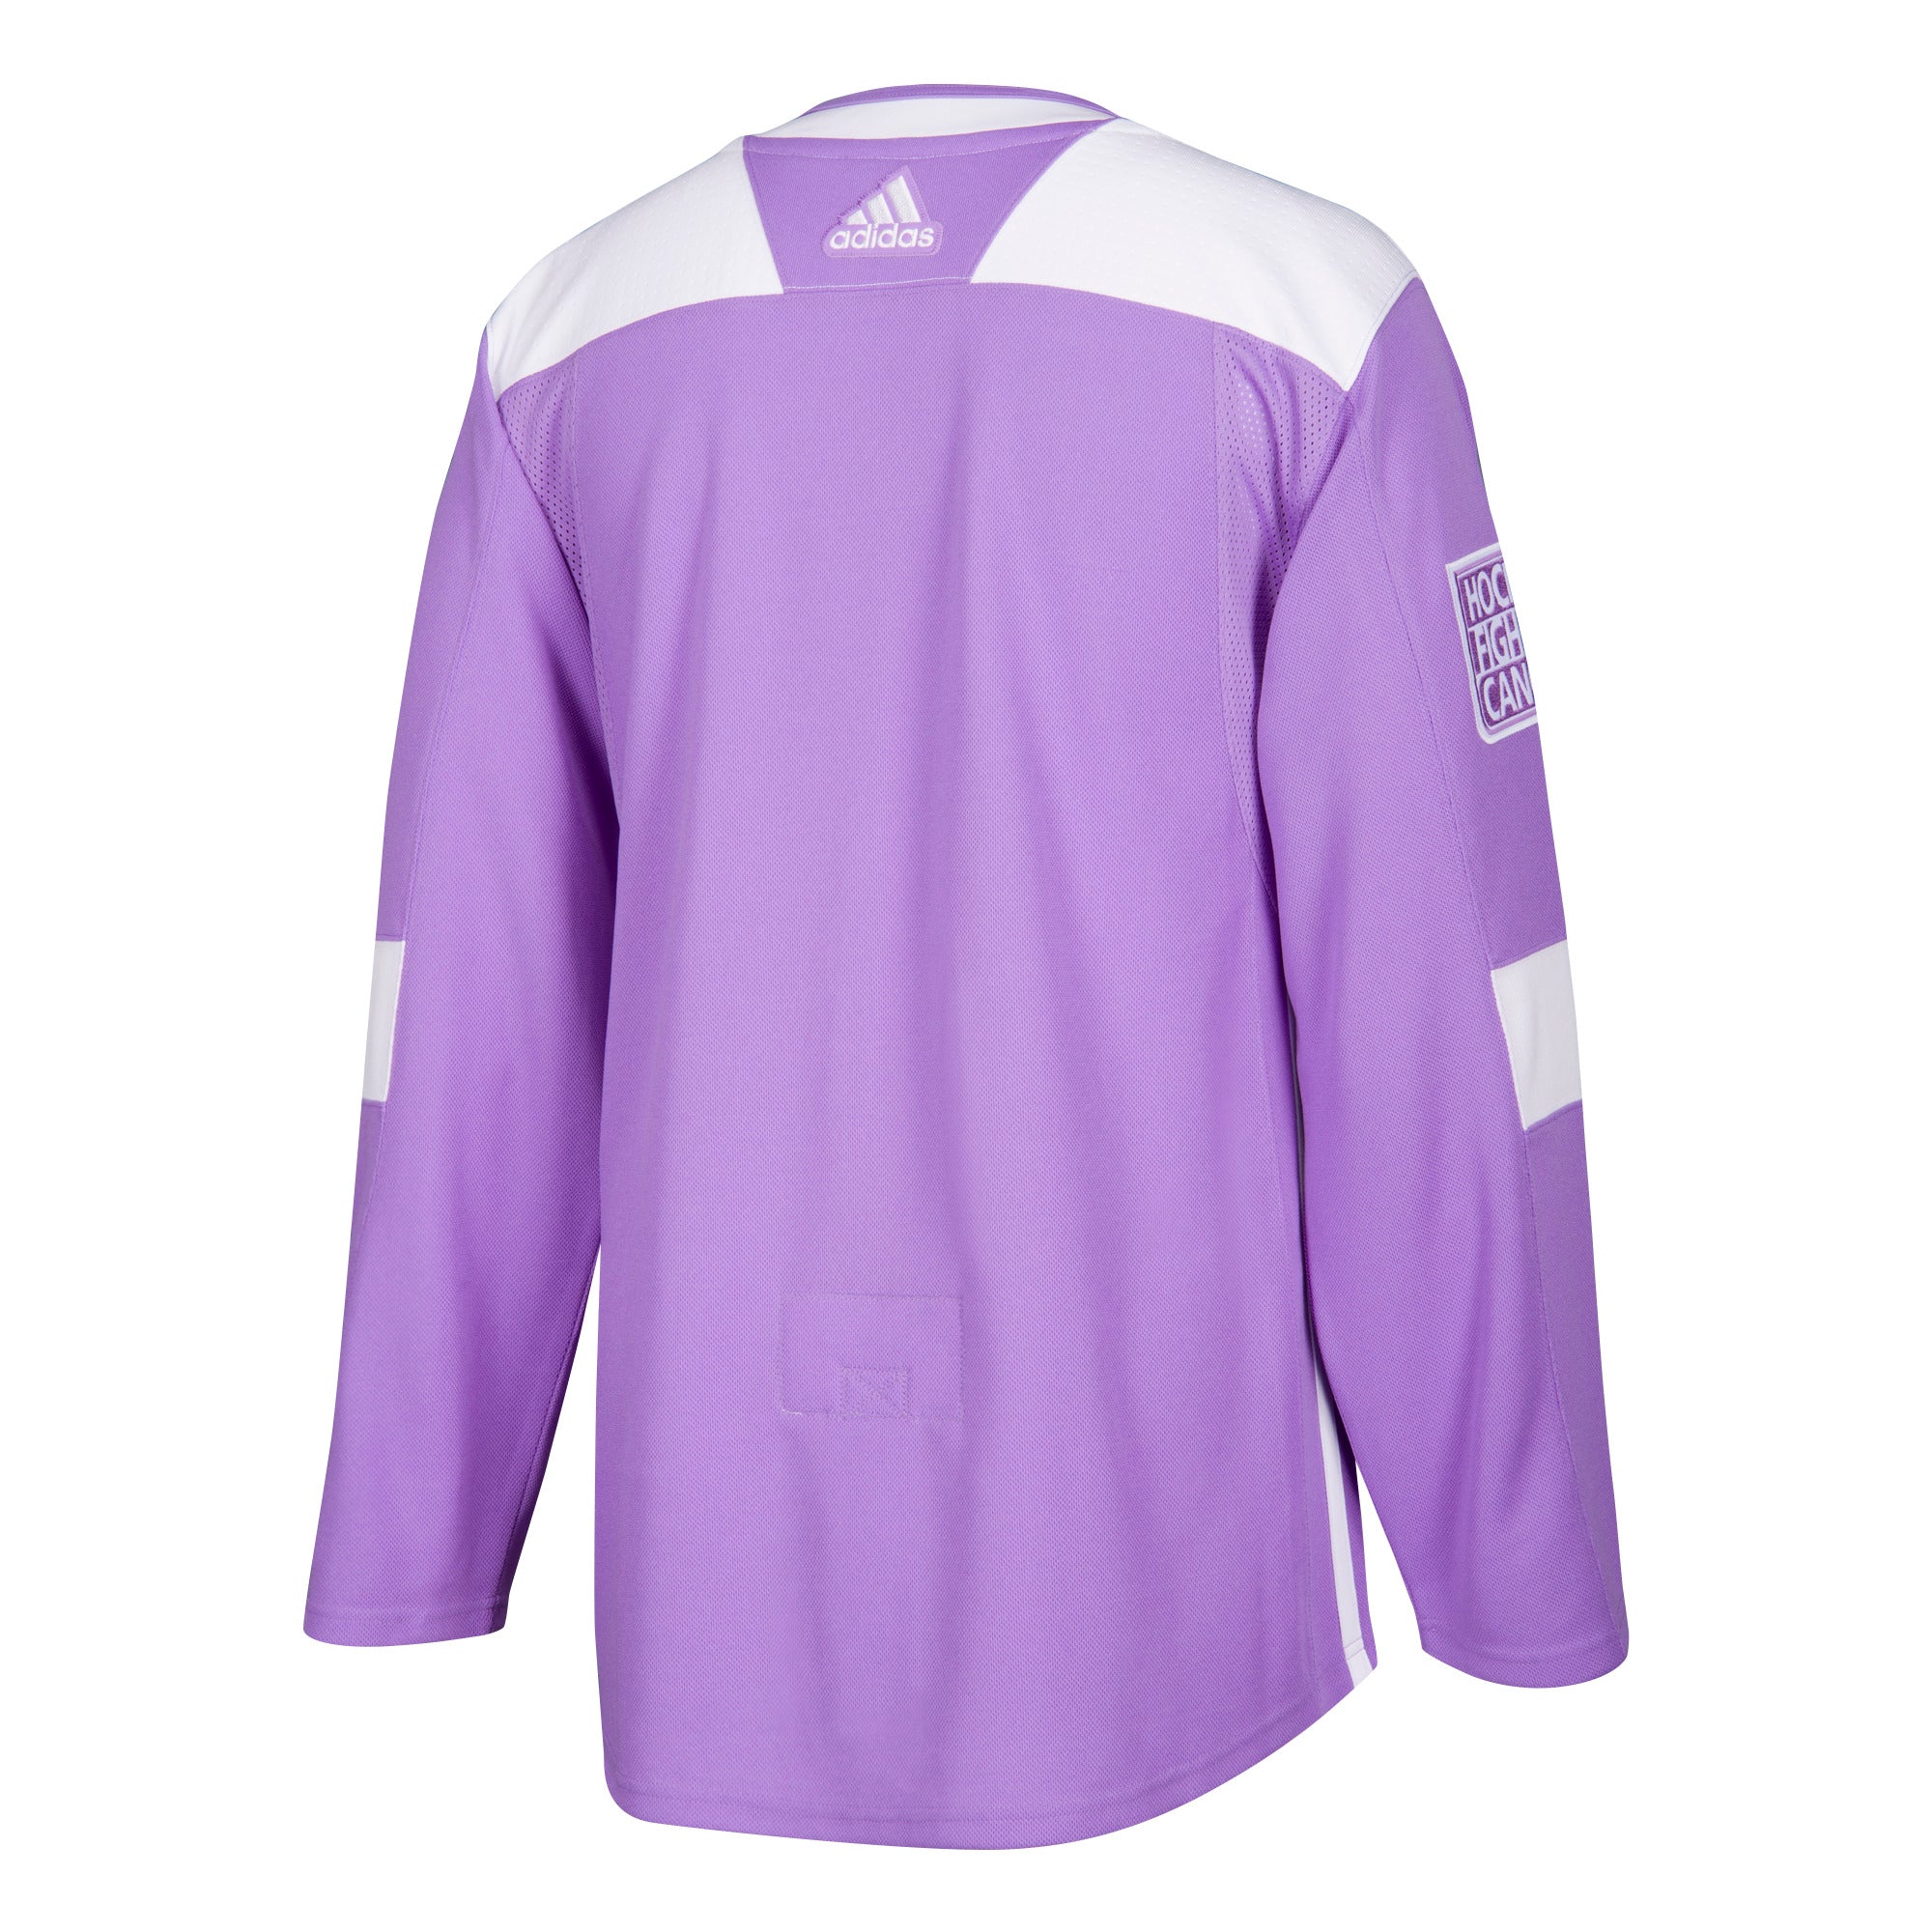 The Elusive Hue: Why Don't Any NHL Teams Have Purple Jerseys?